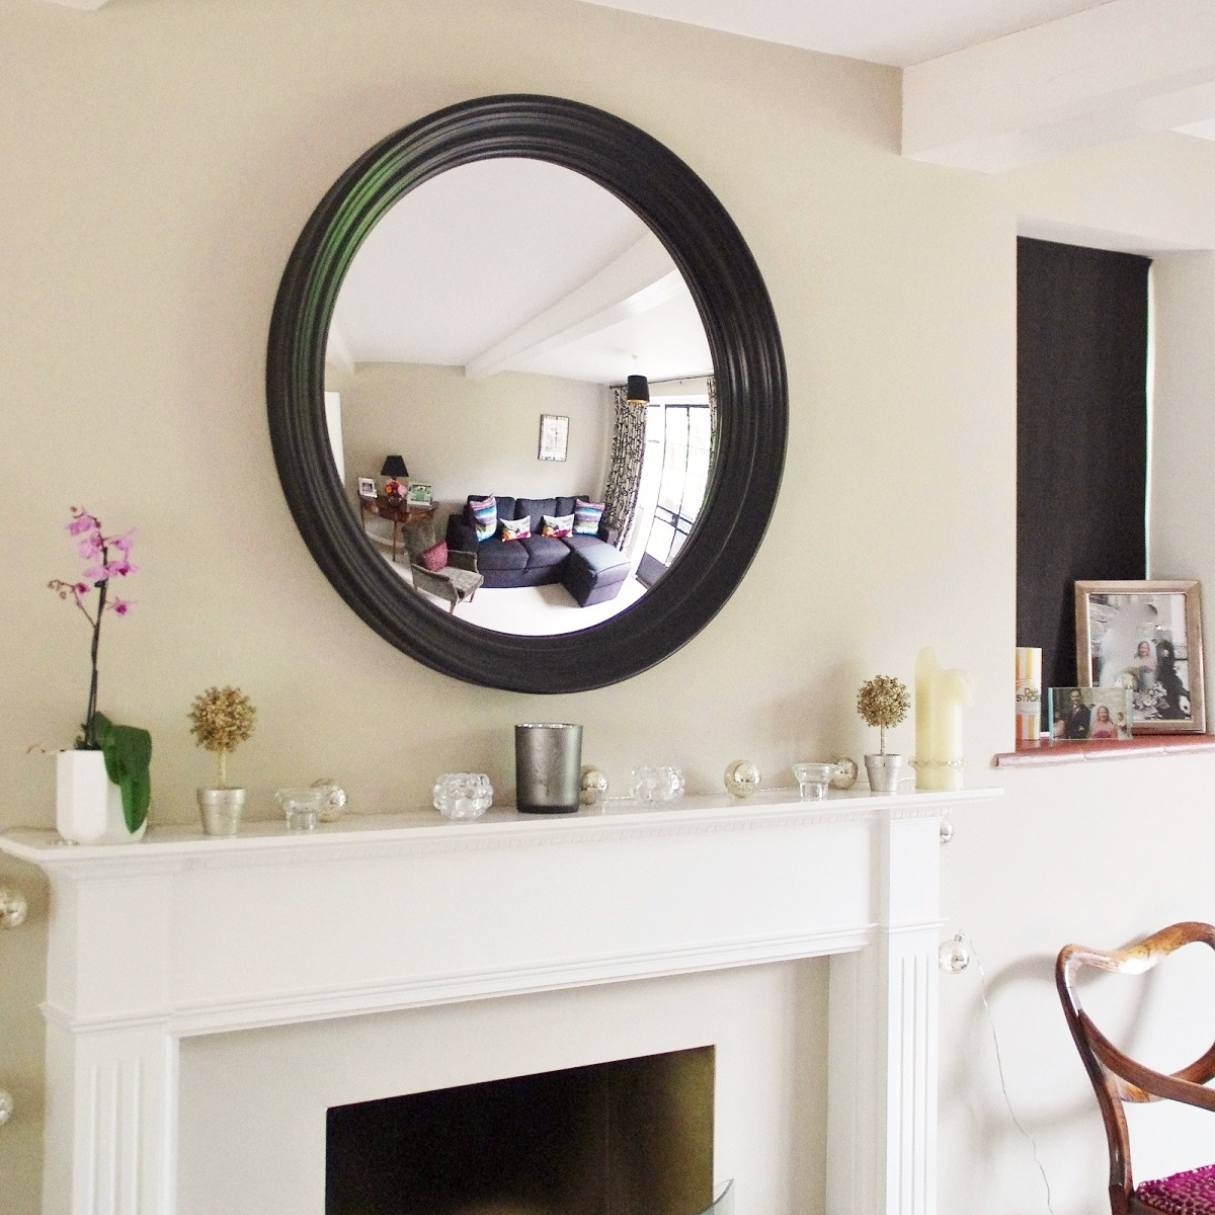 What Is The Right Height To Hang Your Mirrors